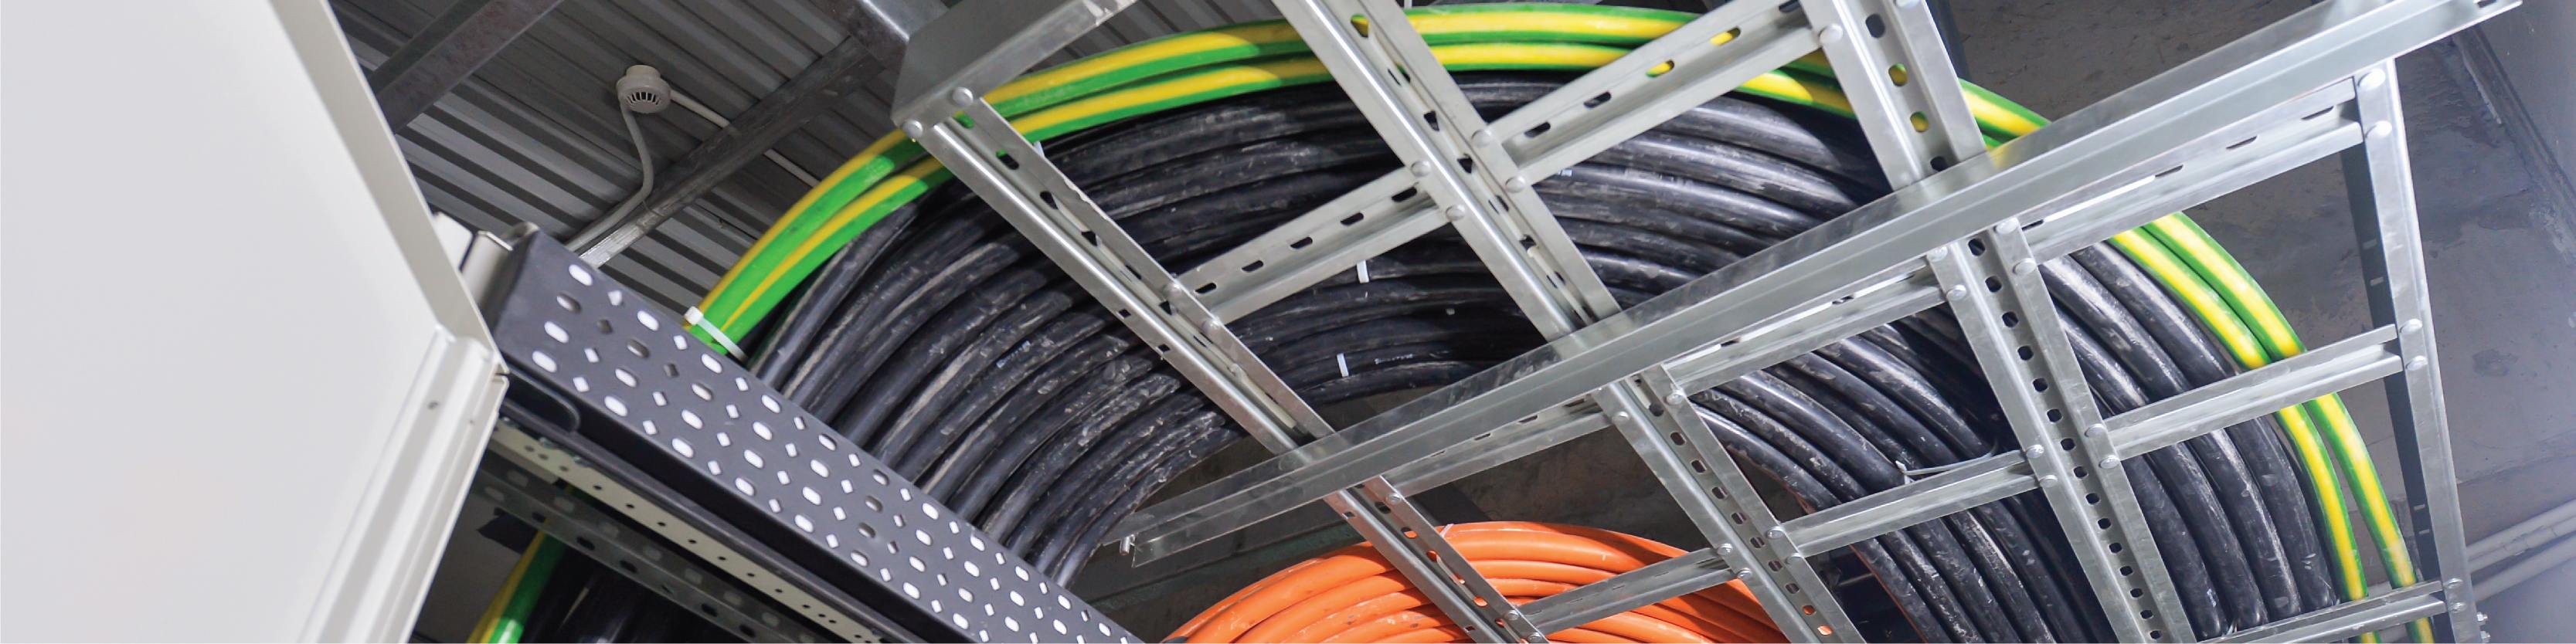 Texcan - News - Technical News - Tray Cable Installation - Banner